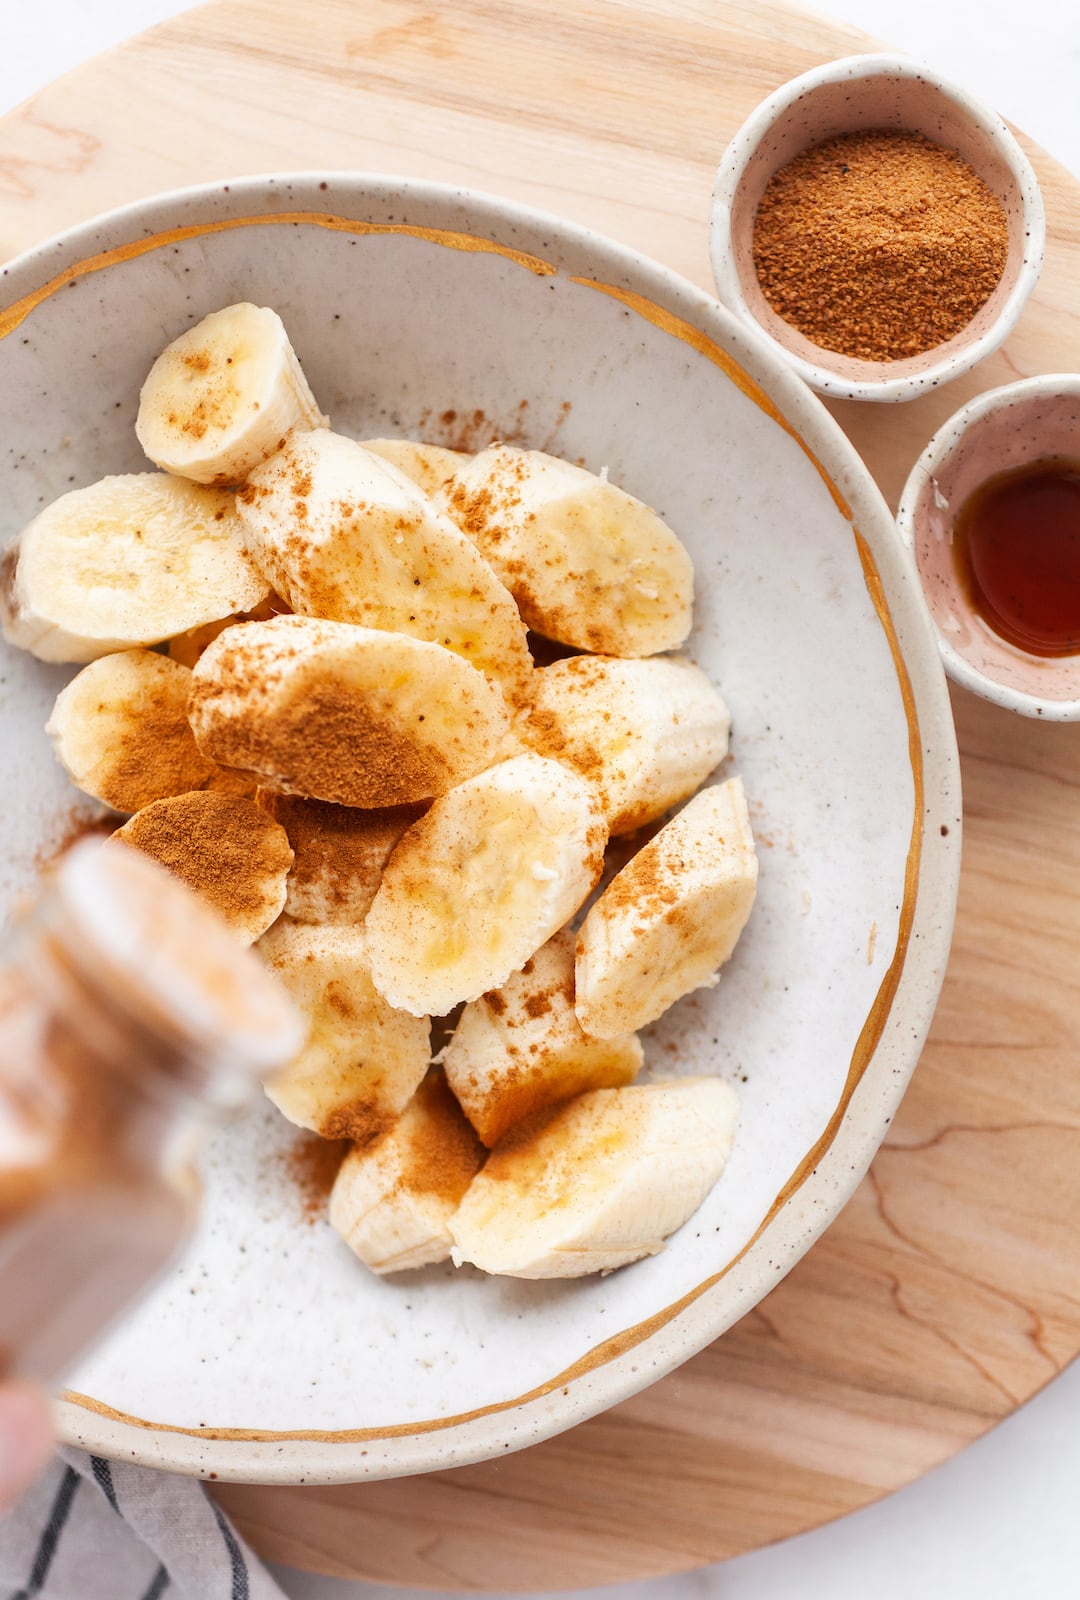 image of a pottery bowl filled with banana slices being topped with cinnamon